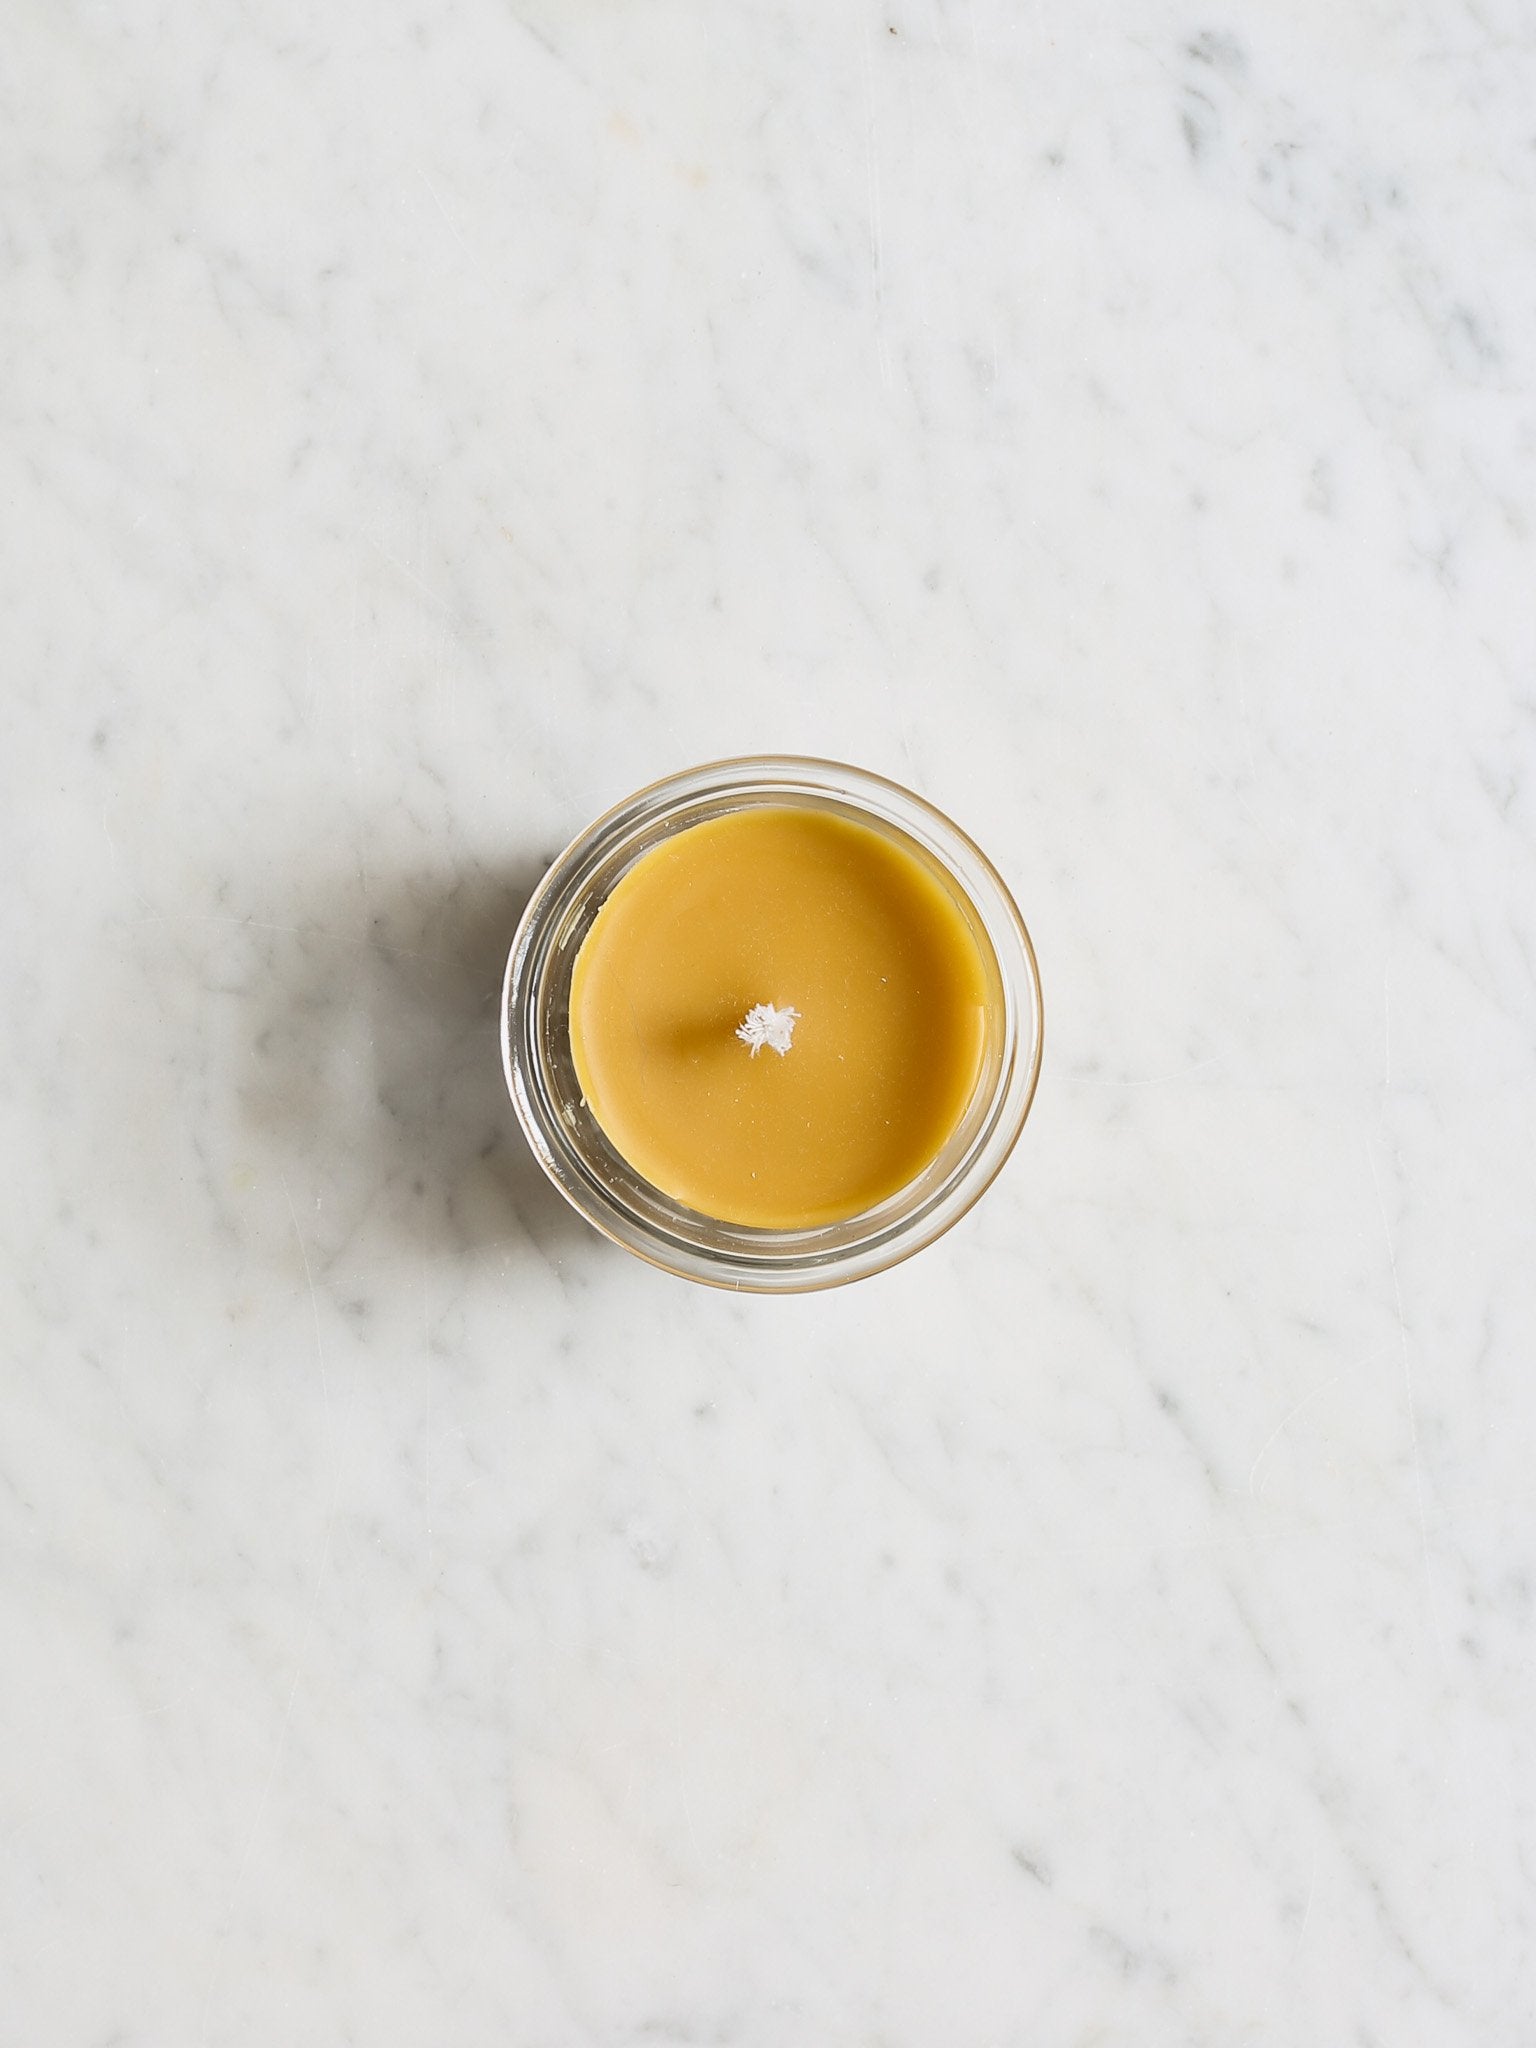 The Cook's Atelier Jam Jar Candle